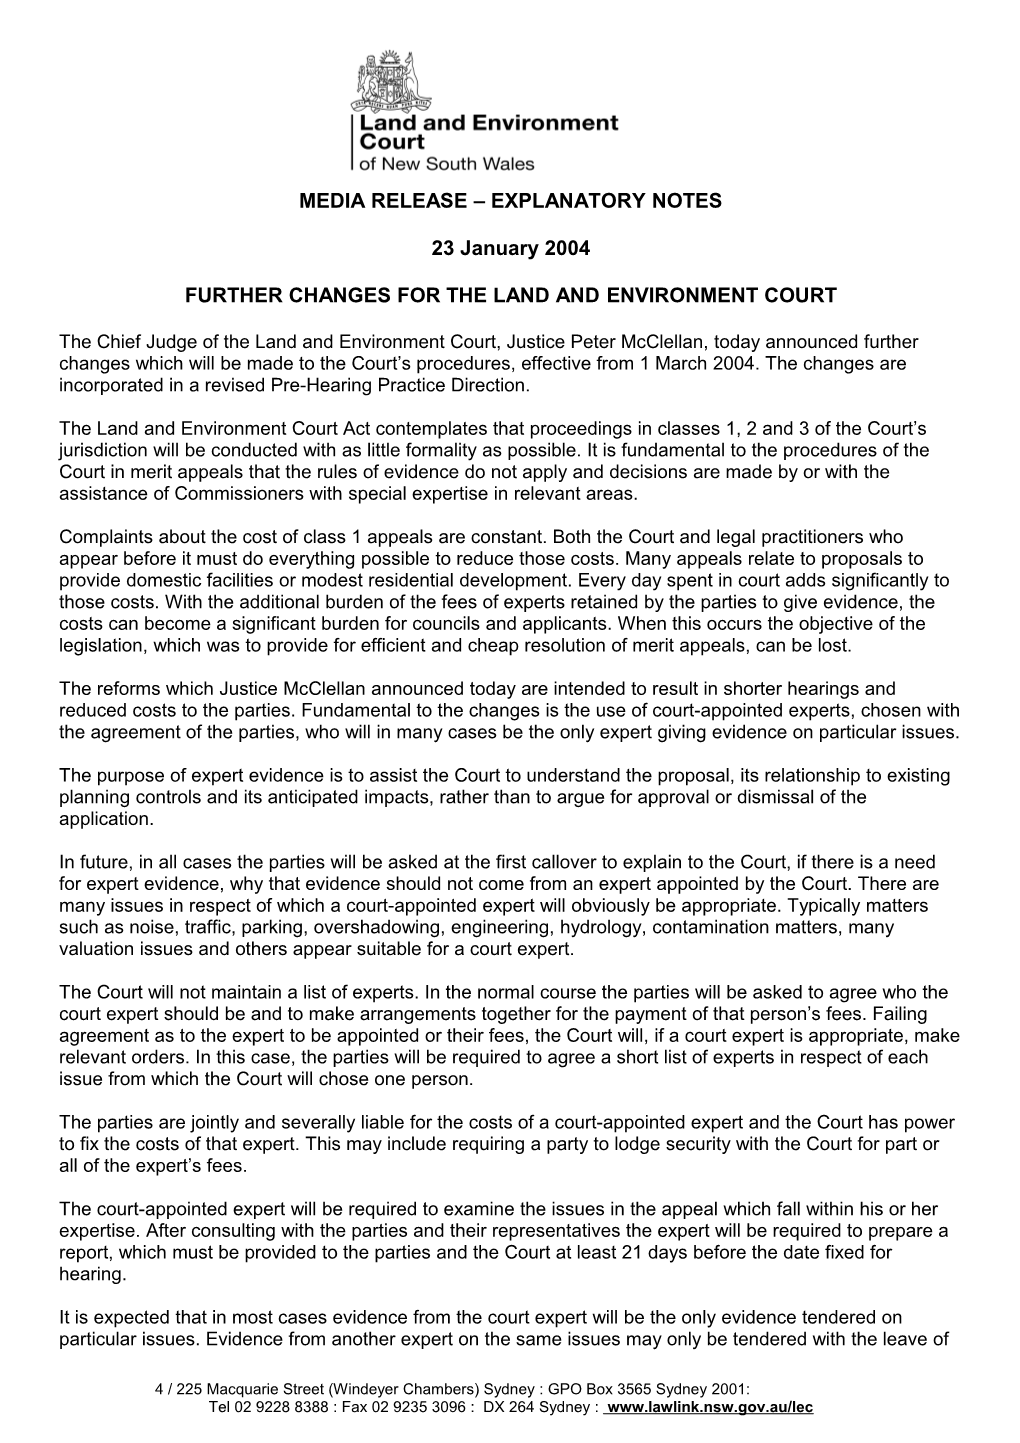 Further Changes for the Land and Environment Court